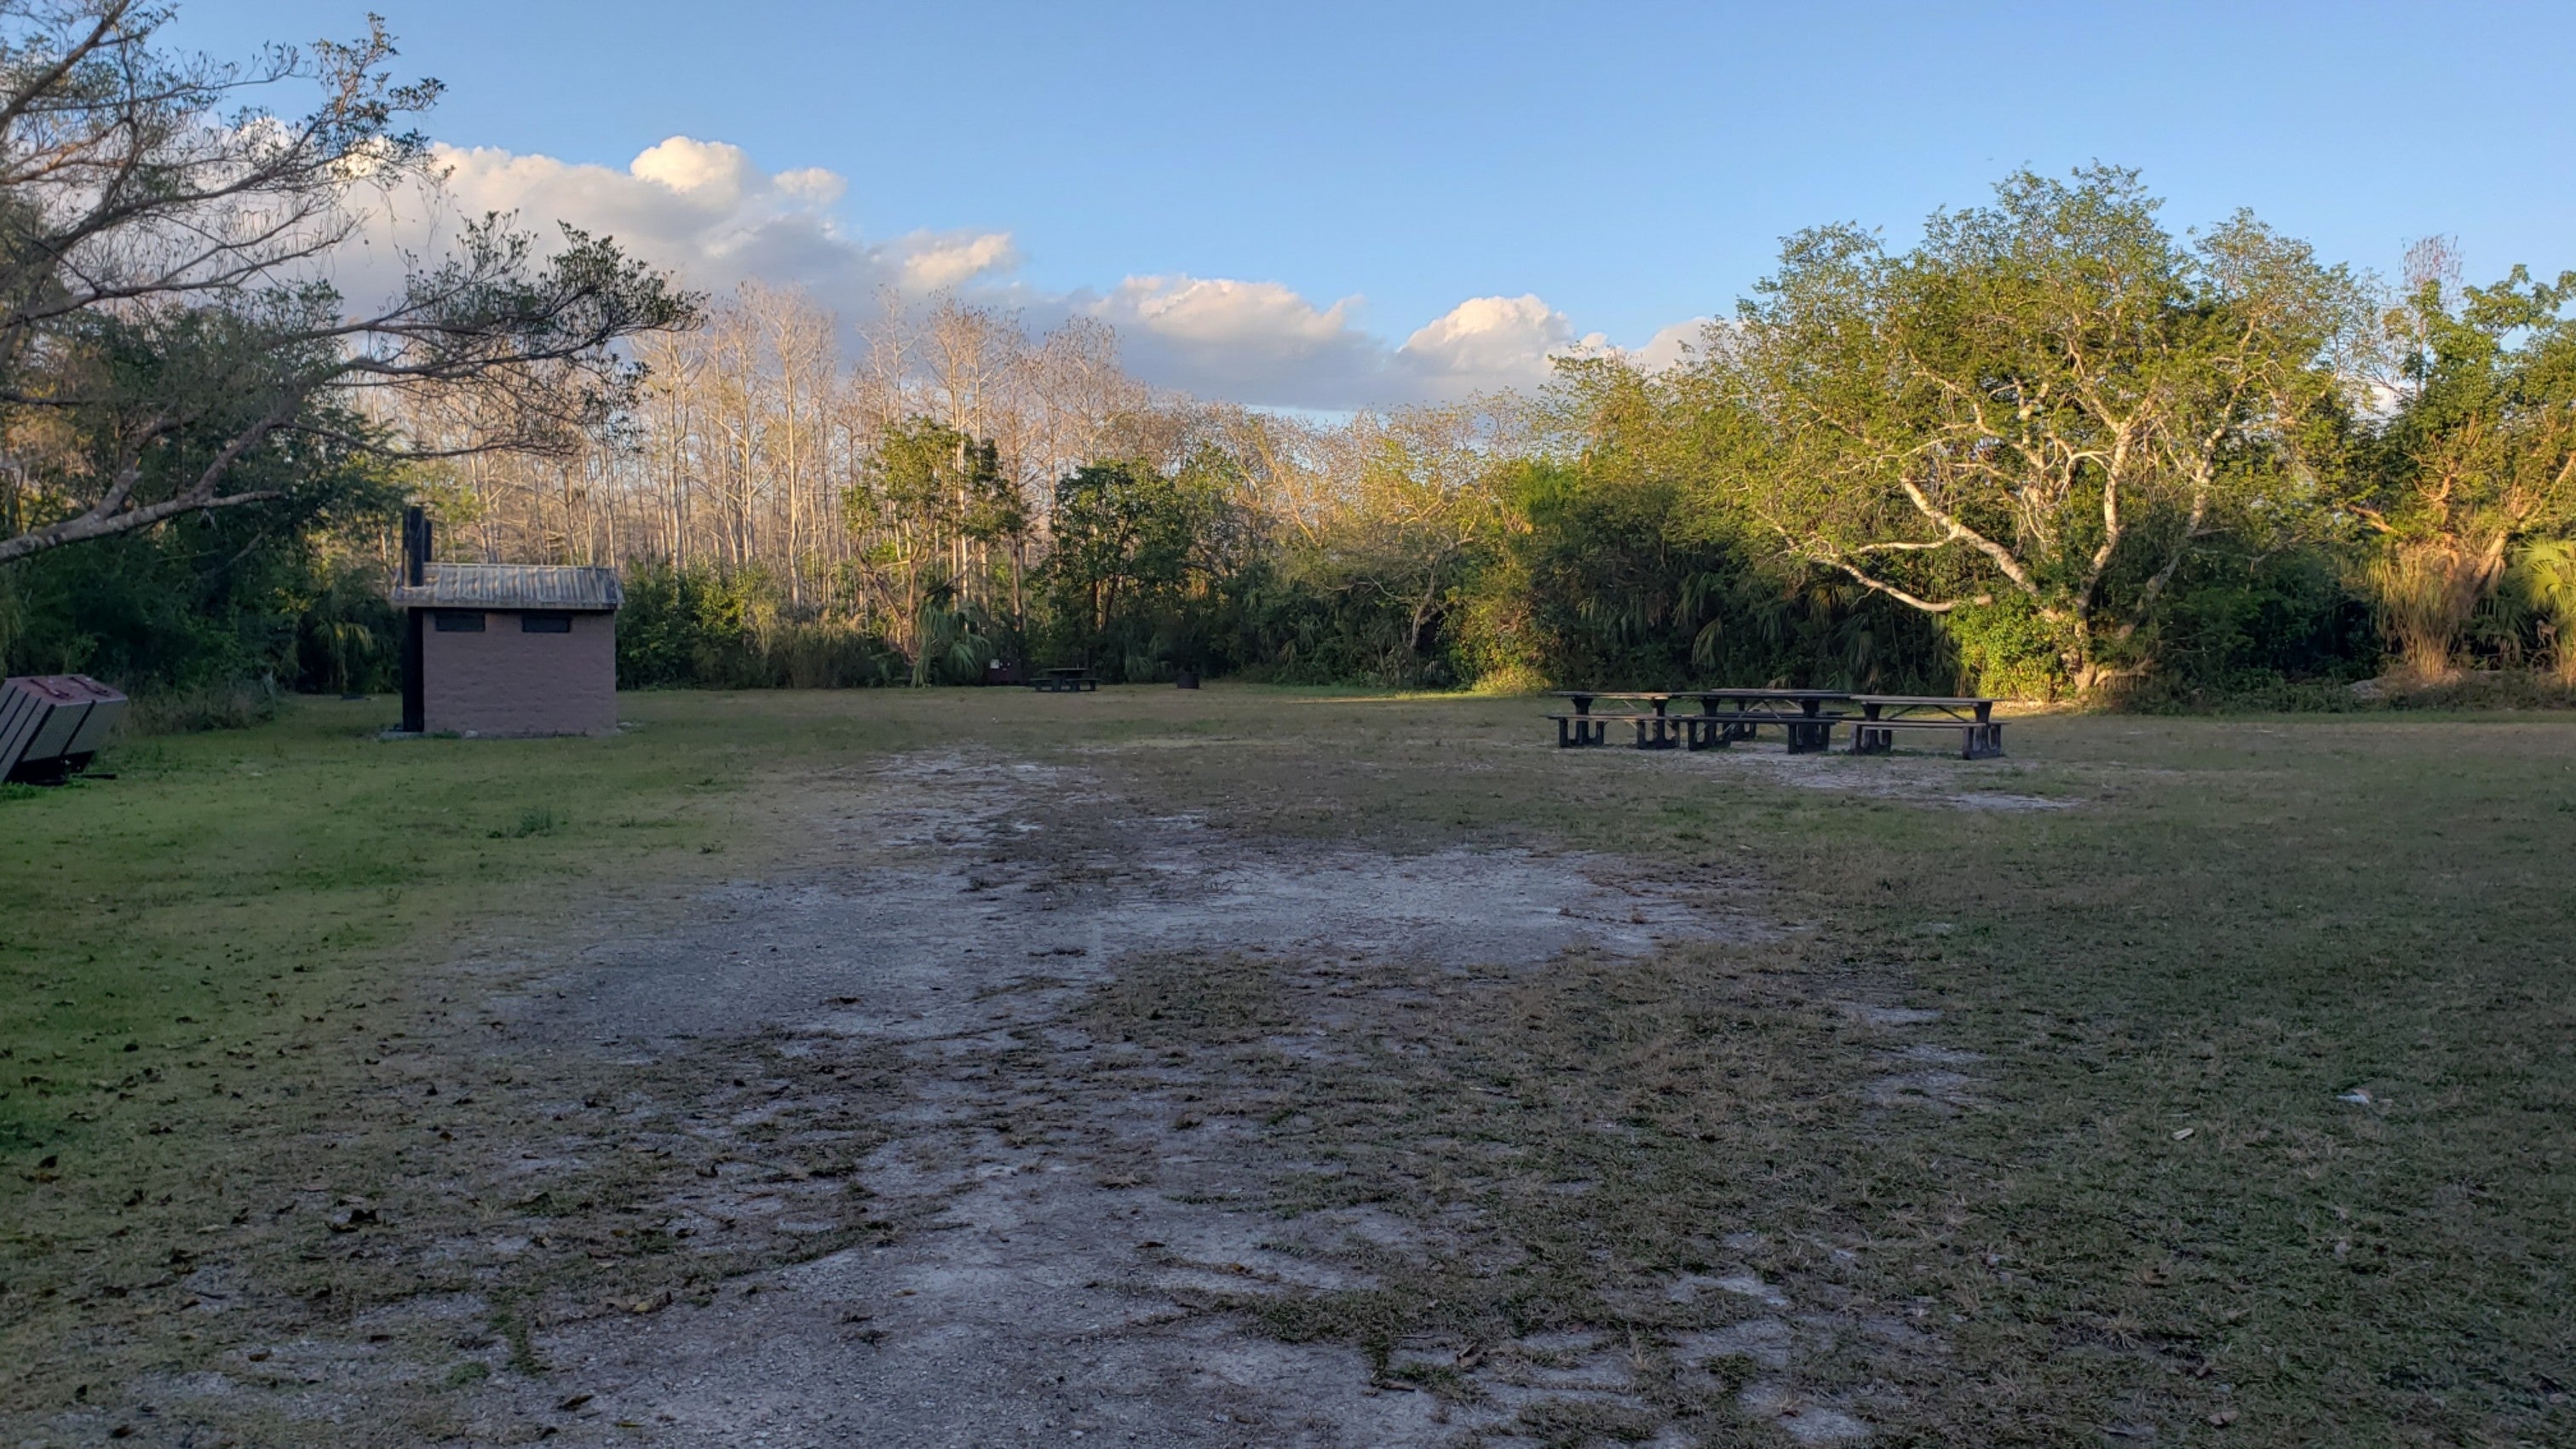 Camper submitted image from Pinecrest Group Campground — Big Cypress National Preserve - 4